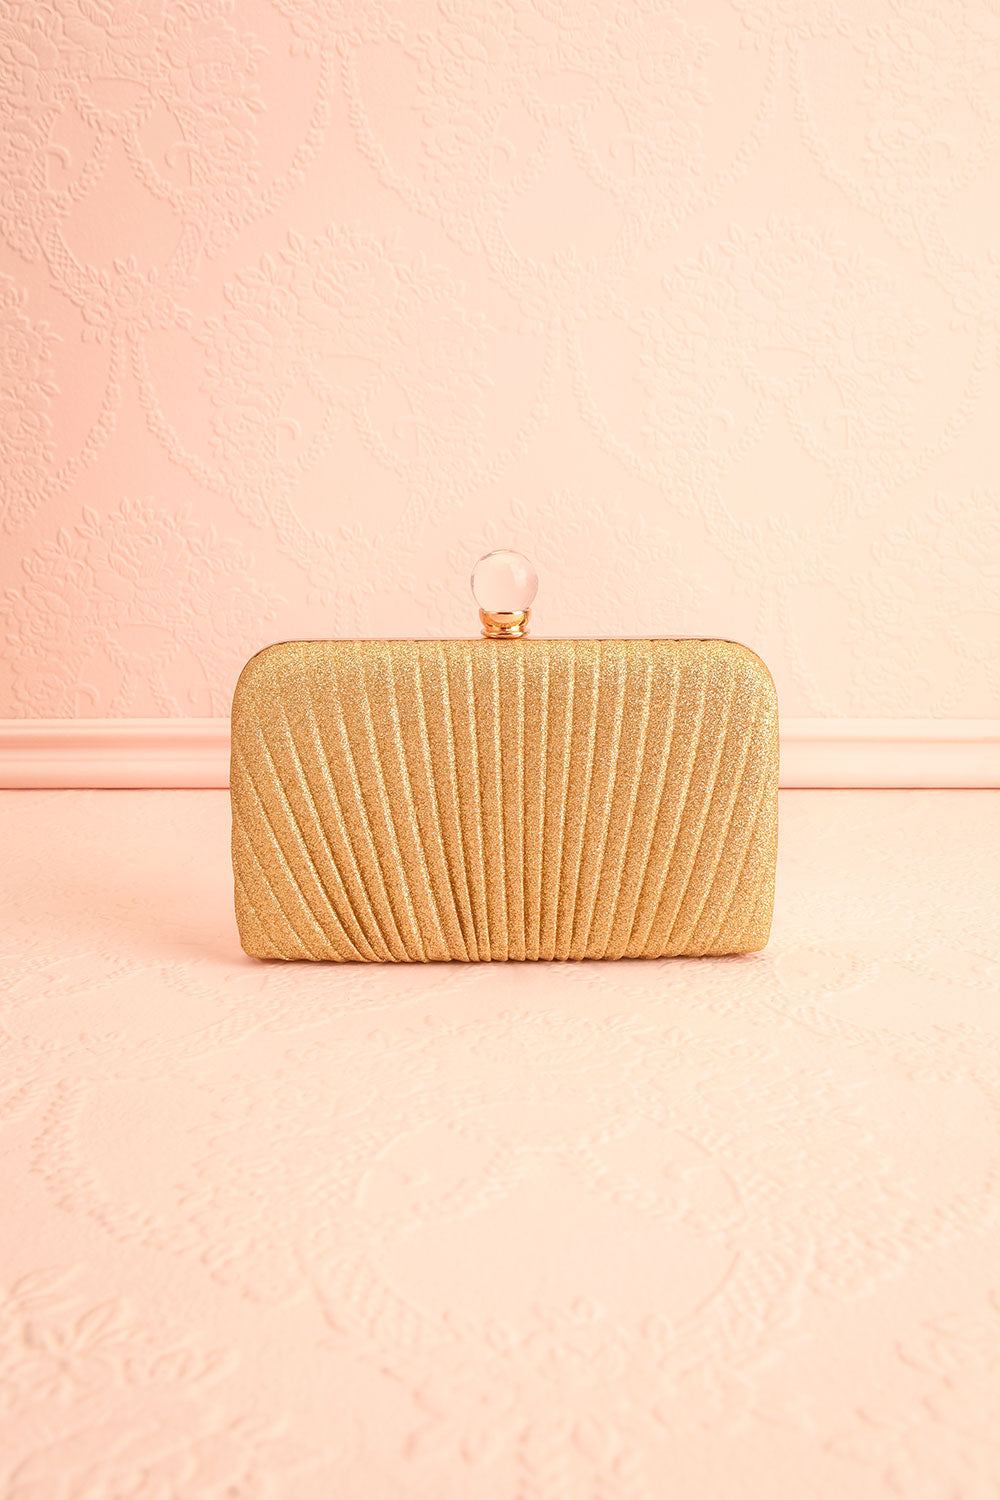 Raje Gold Sparkly Evening Clutch | Boutique 1861 front view